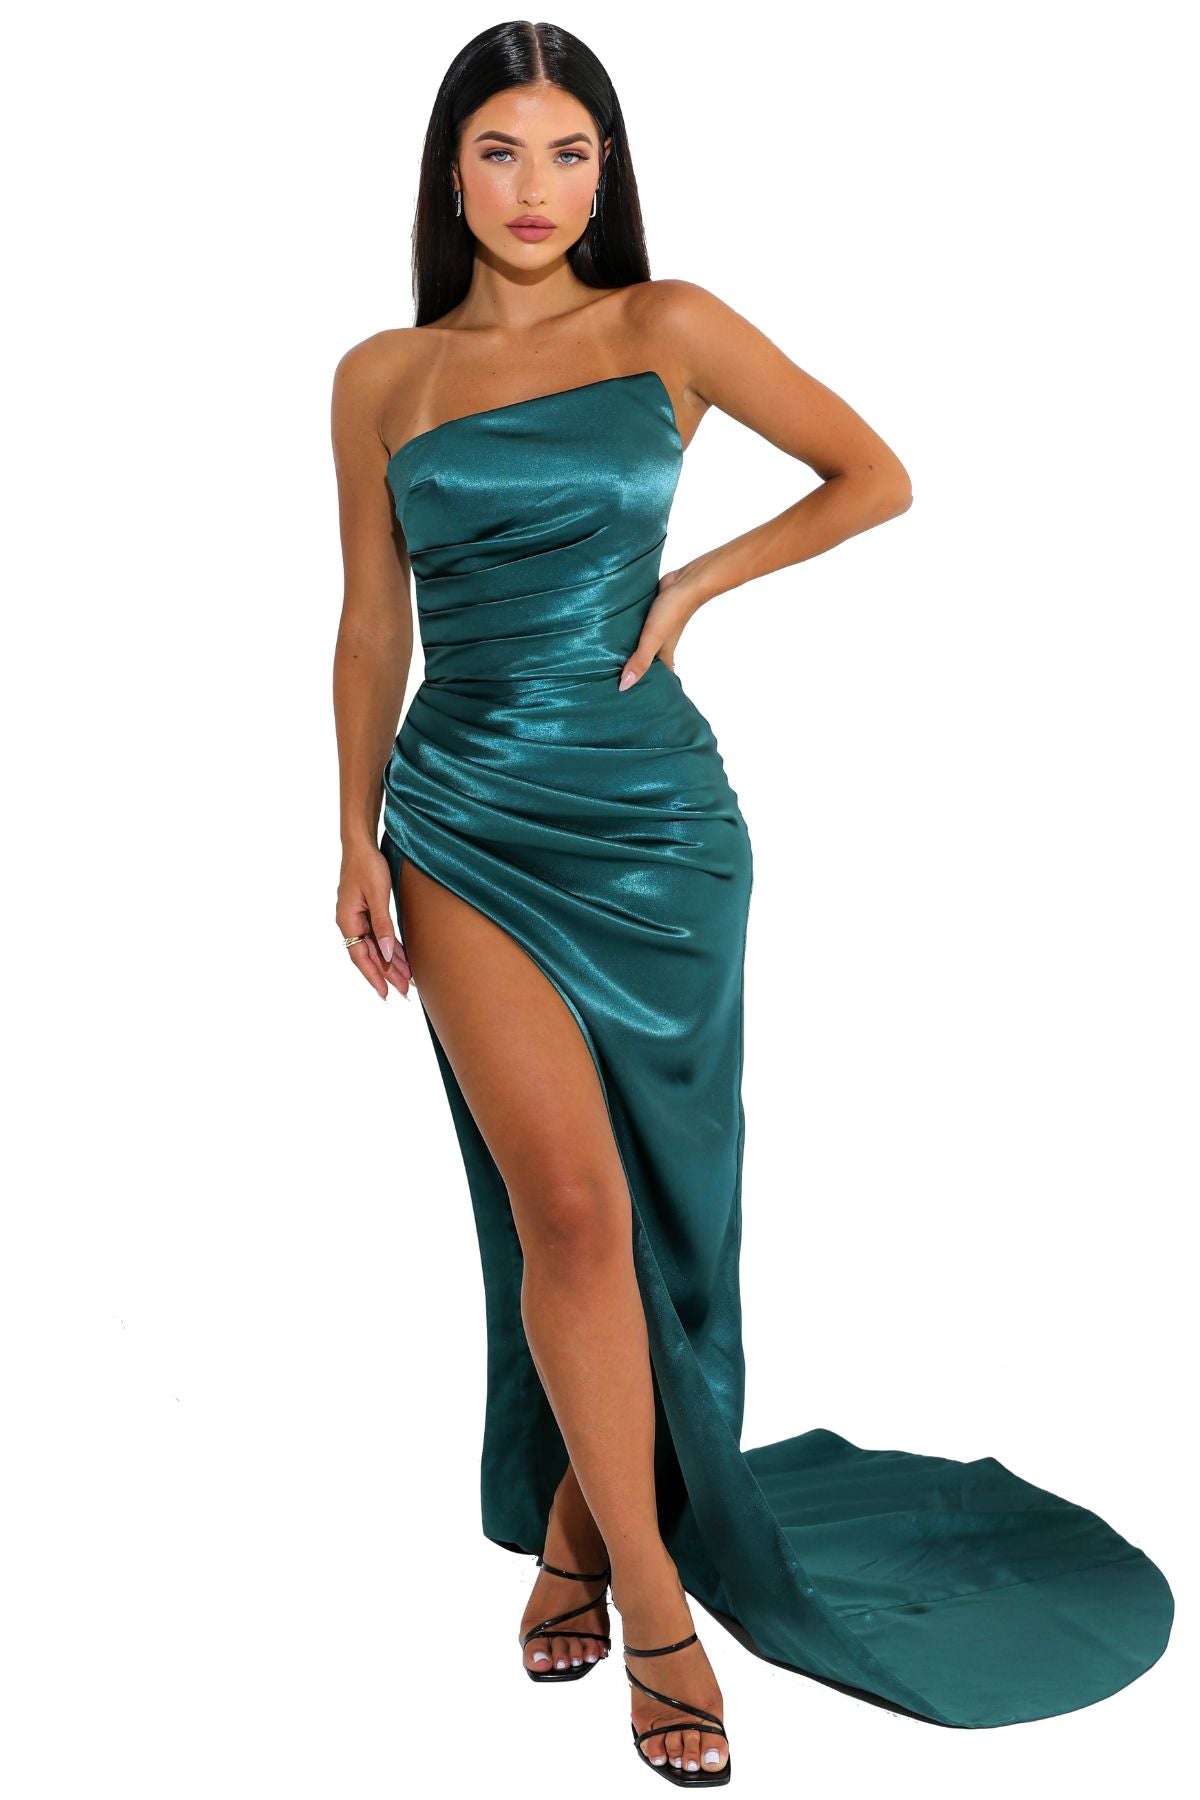 Nookie NOOKIE Diaz Cut Out Gown (Spearmint) - RRP $369 - UsersNK002DropboxNOOKIE_-_DIAMONDS_-_MAY_JUNE_JULY_2022ECOMM_RESIZEDDIAZ-CUT-OUT-GOWN_SPEARMINT-F2.jpg